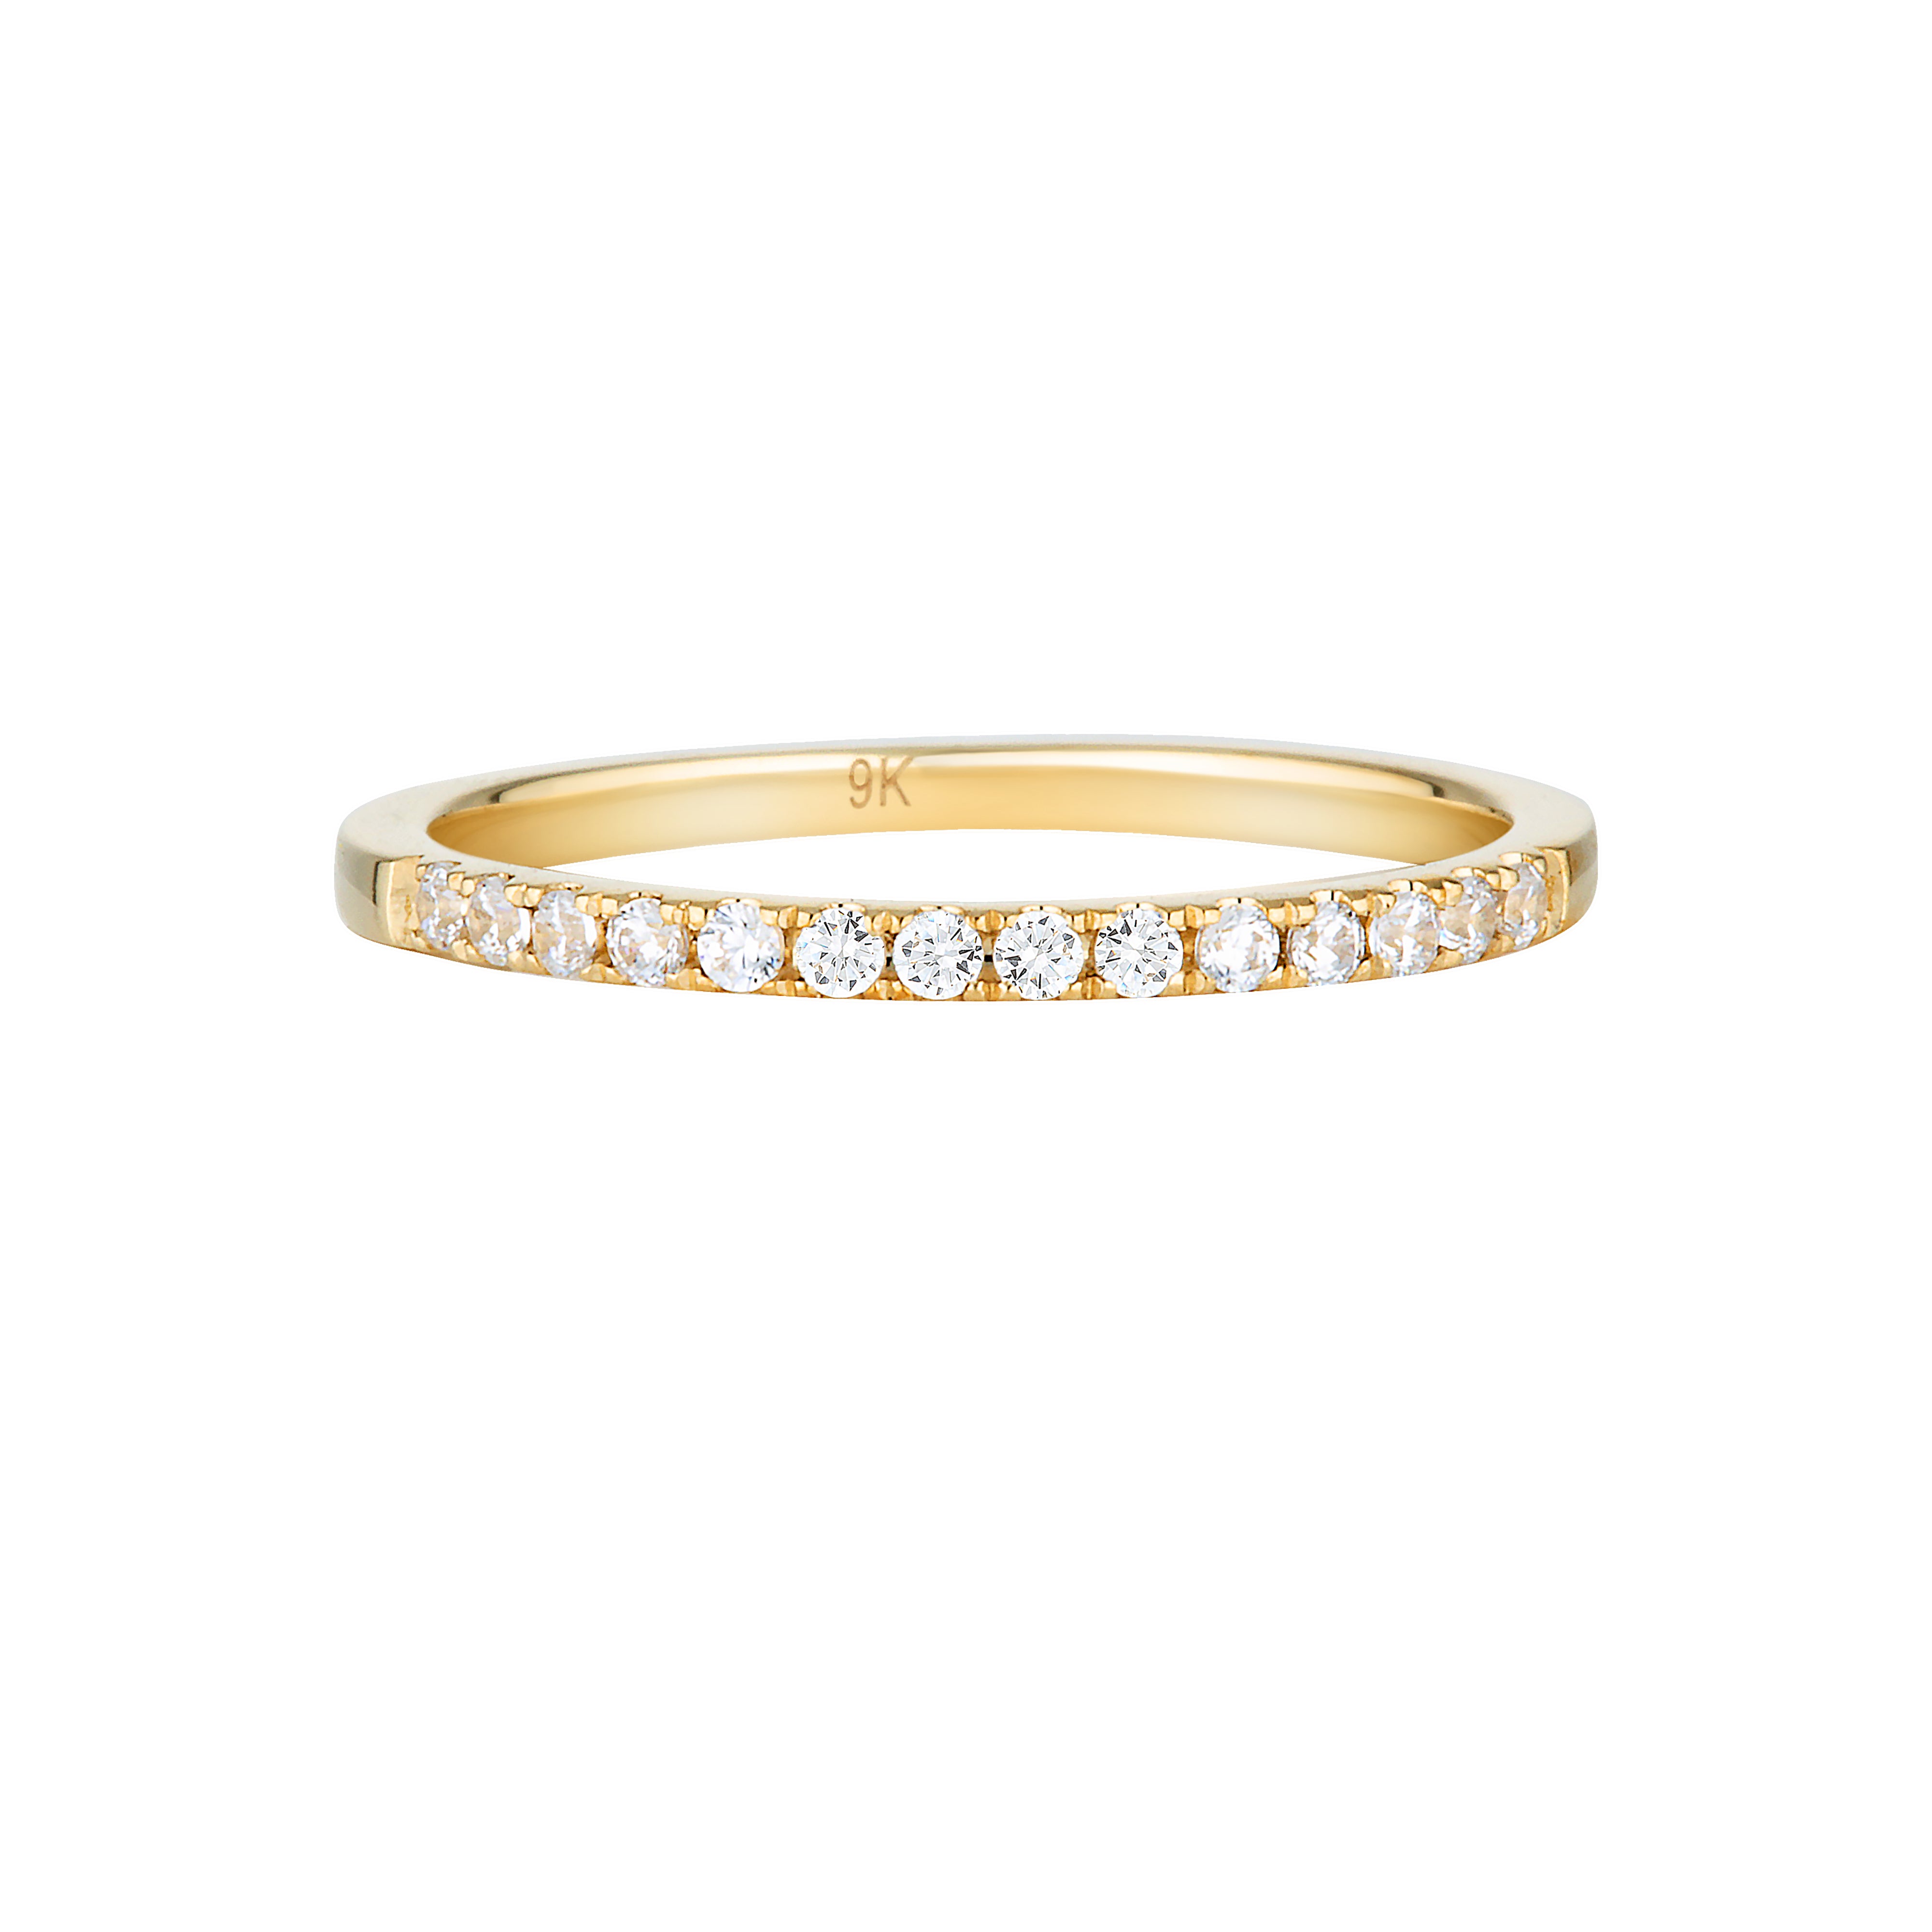 ROUND BRILLIANT CUT MOISSANITE WEDDING BAND IN 9CT YELLOW GOLD